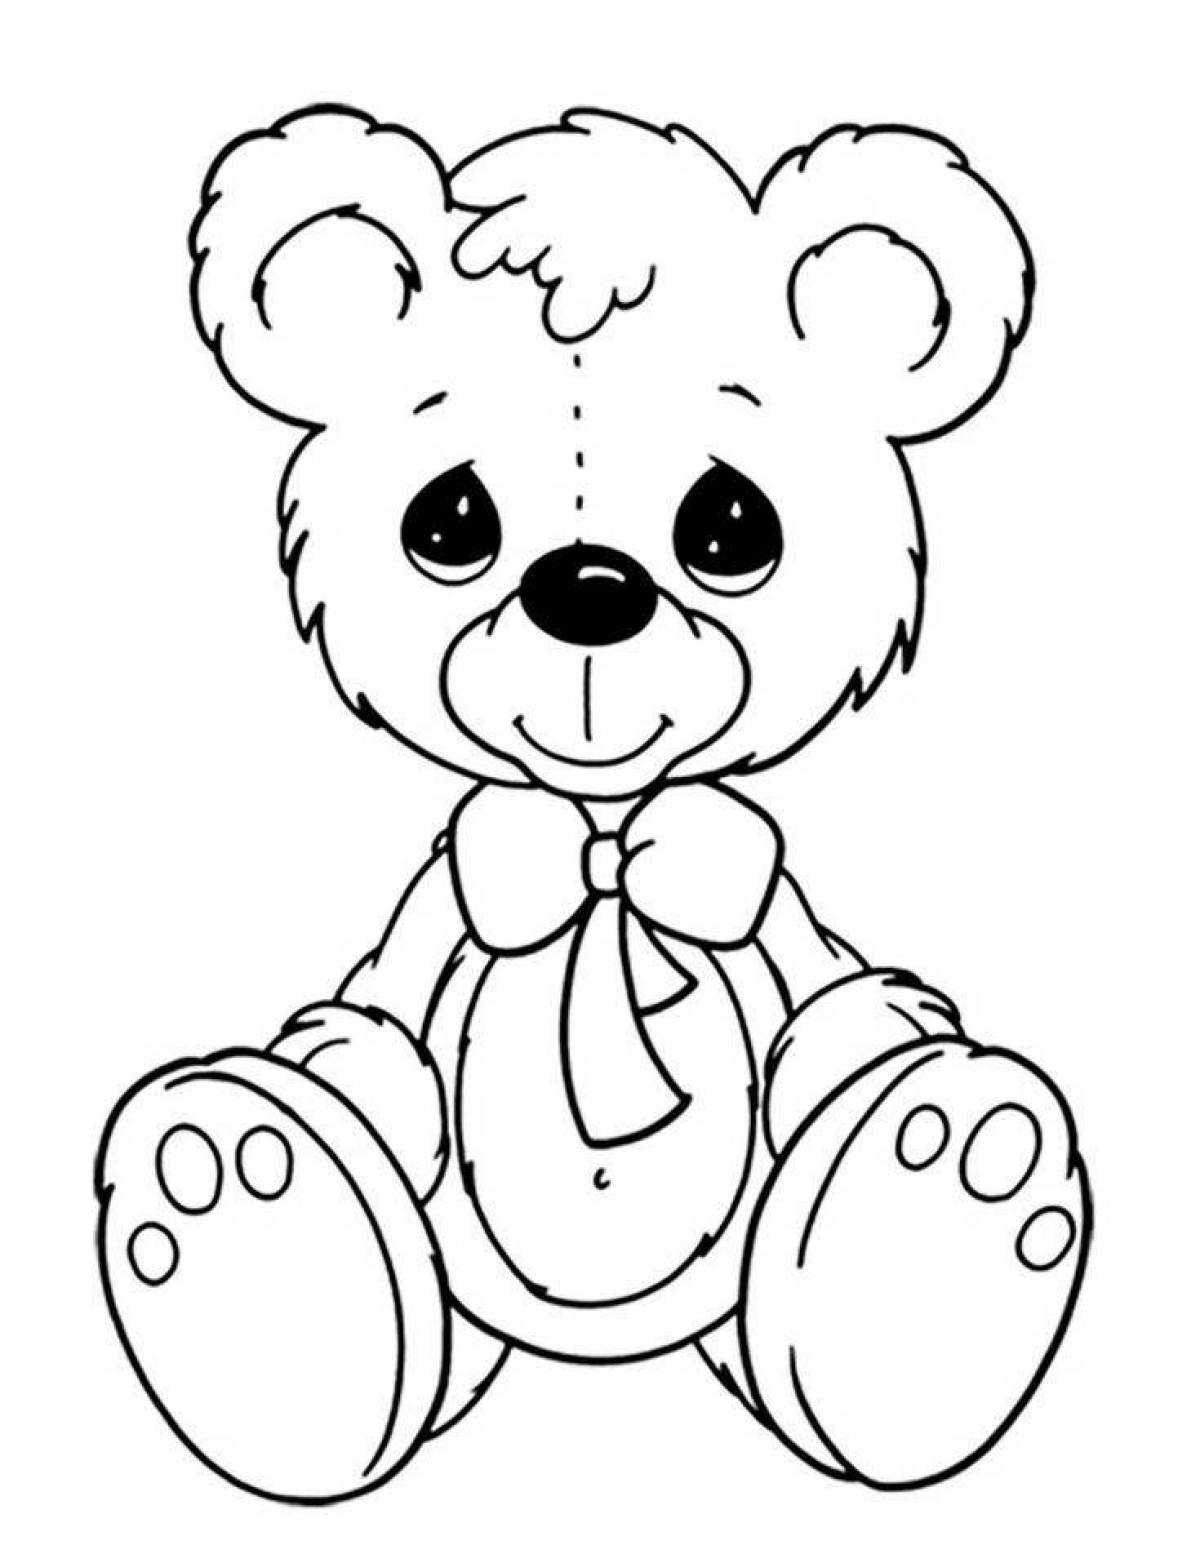 Coloring funny bear for kids